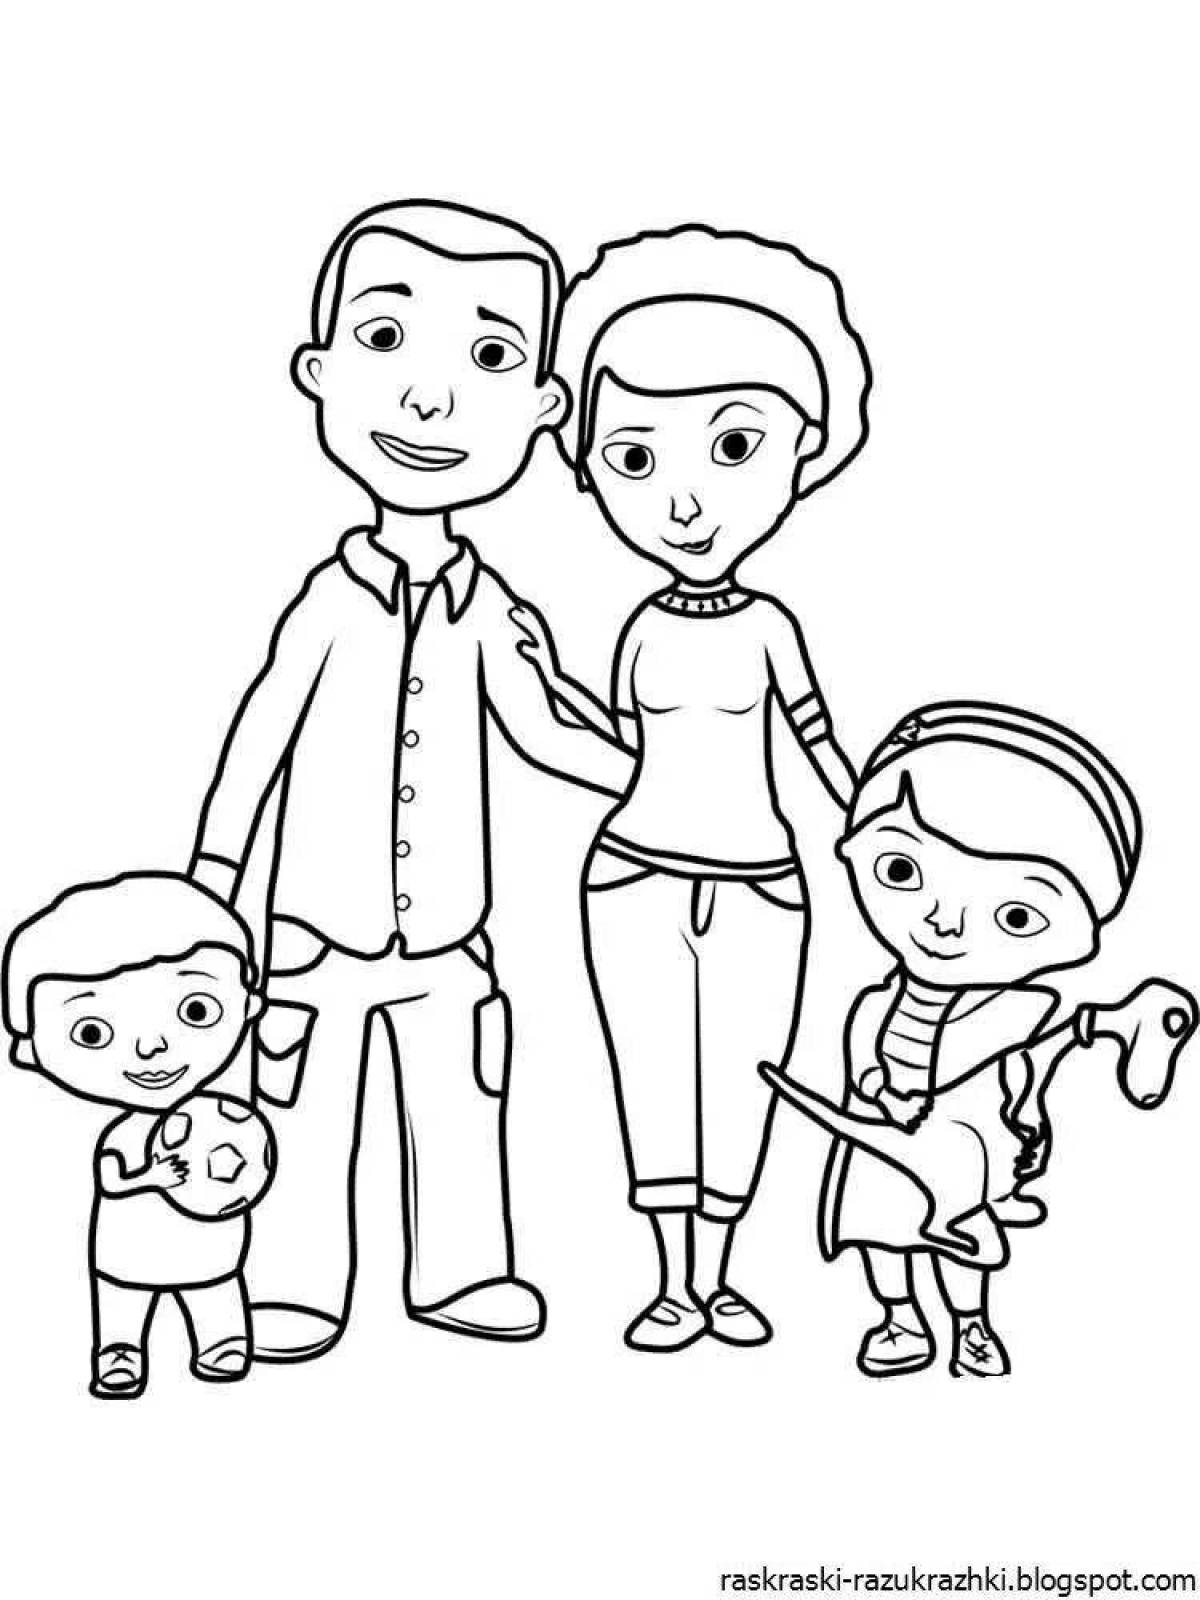 Great family coloring book for kids